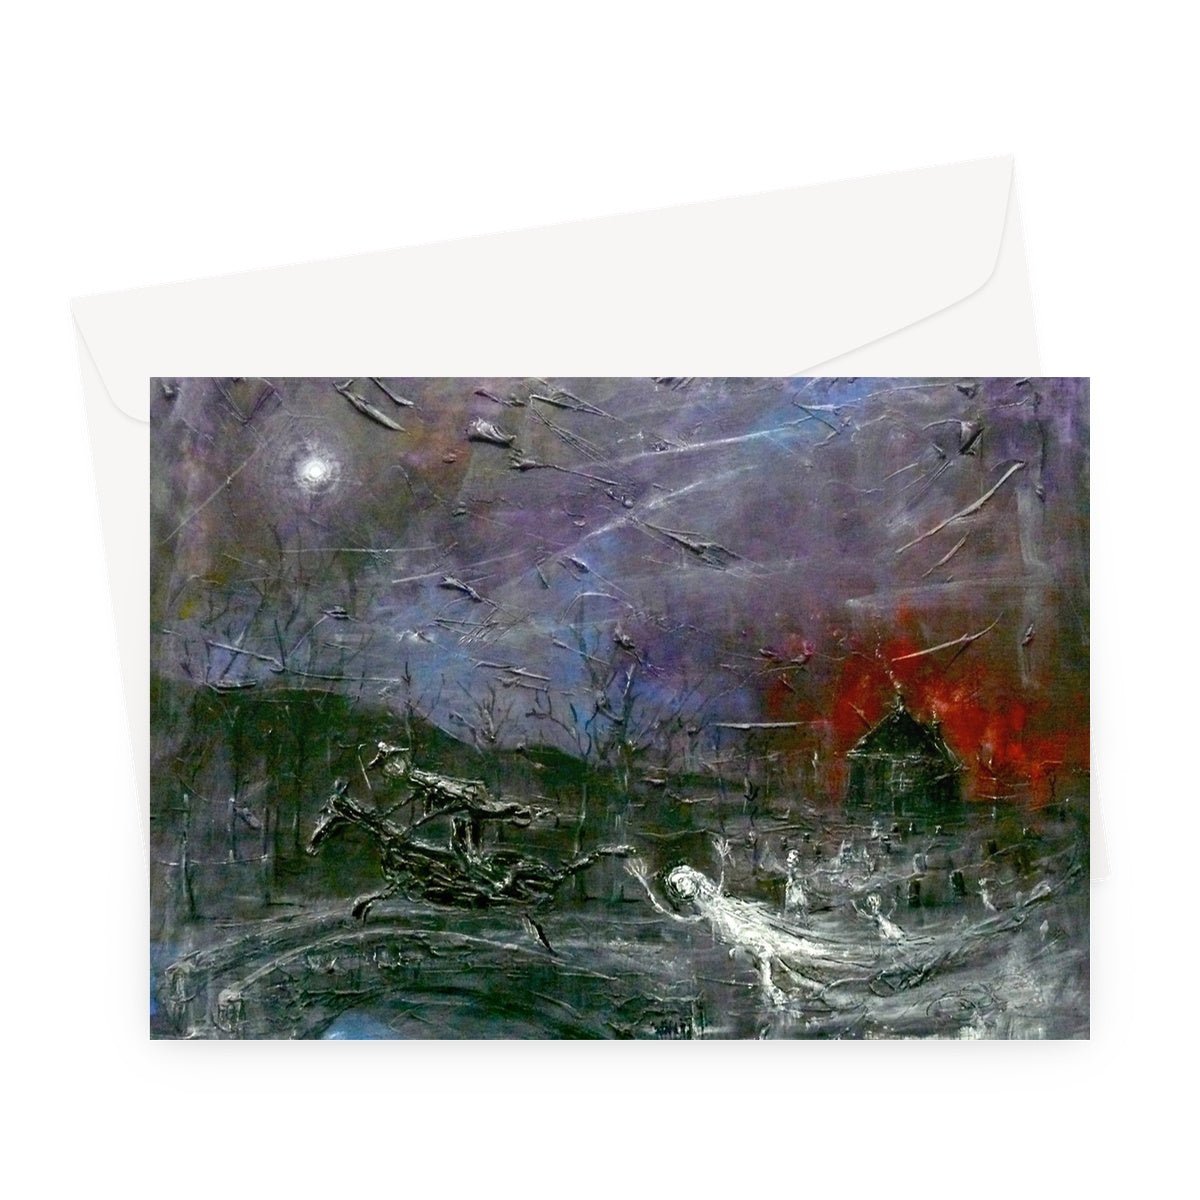 Tam O Shanter Art Gifts Greeting Card-Greetings Cards-Abstract & Impressionistic Art Gallery-A5 Landscape-1 Card-Paintings, Prints, Homeware, Art Gifts From Scotland By Scottish Artist Kevin Hunter